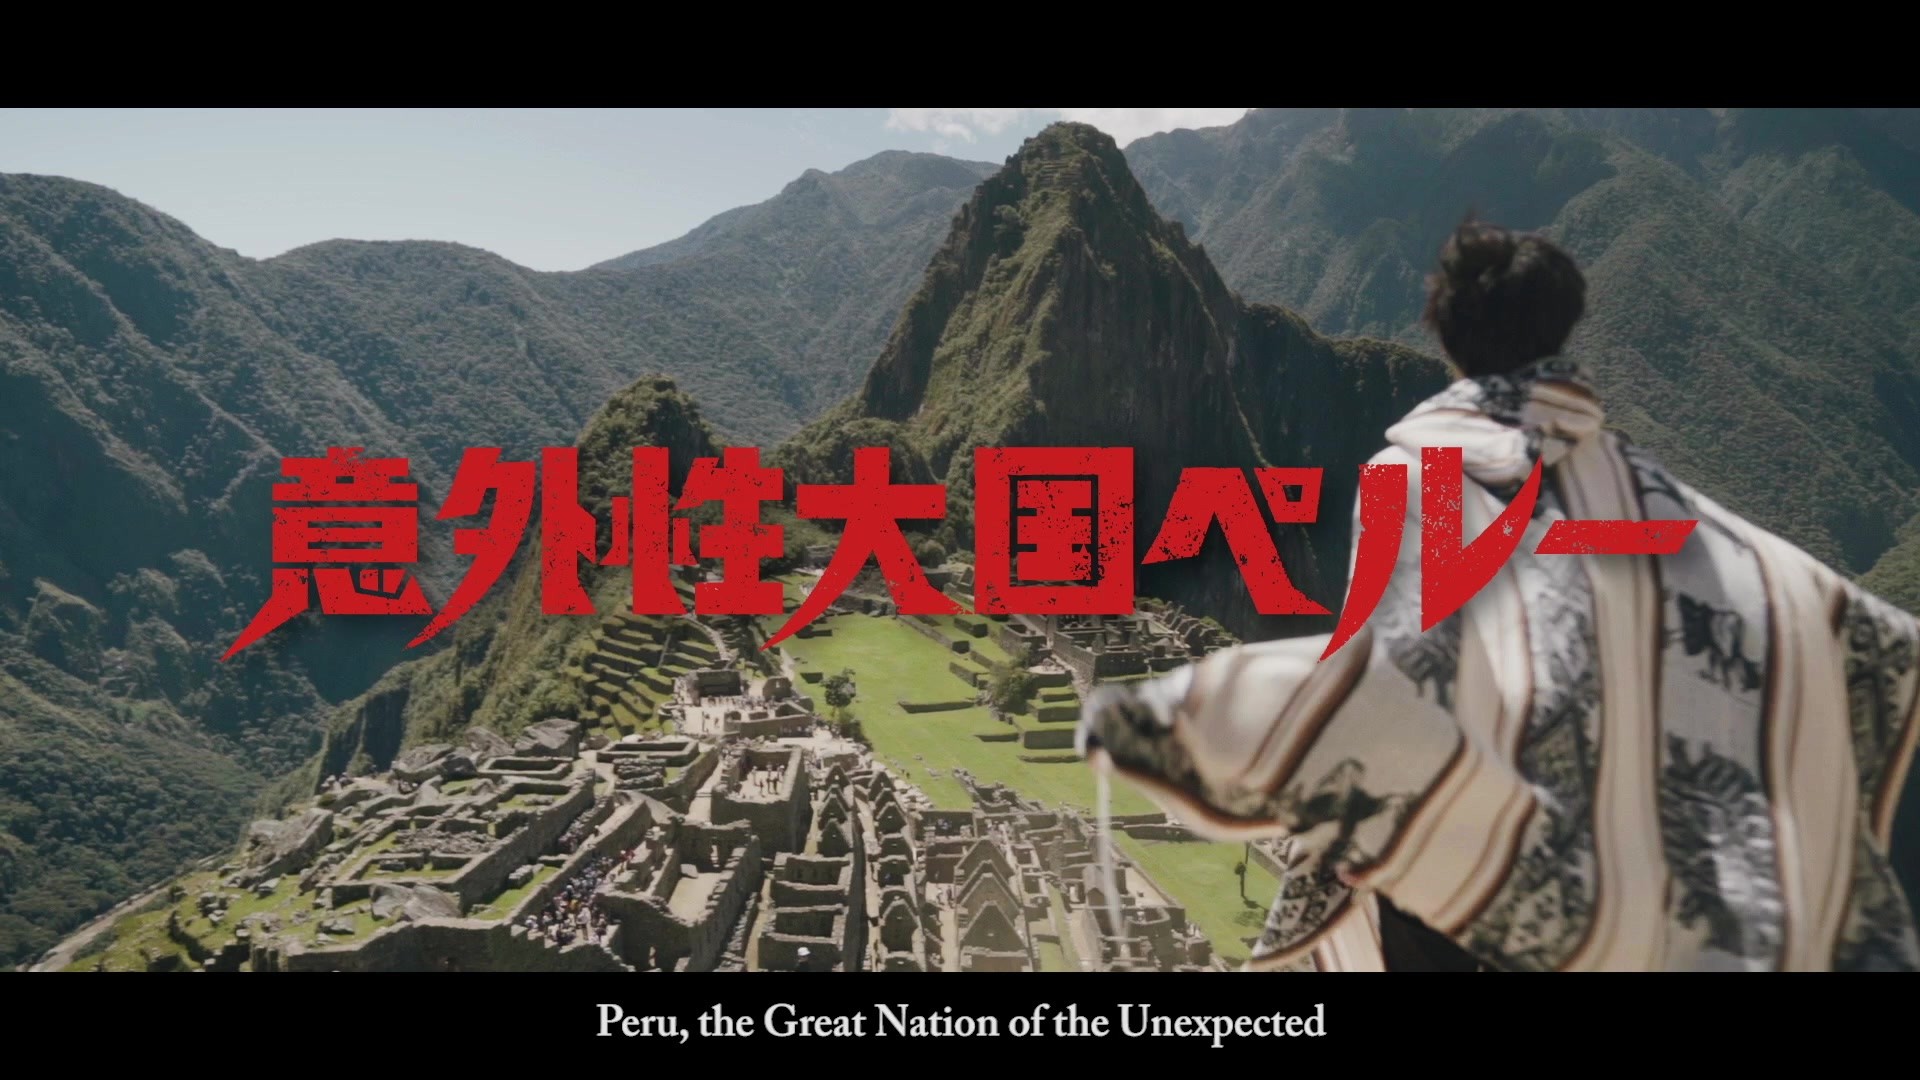 Peru, the Great Nation of the Unexpected